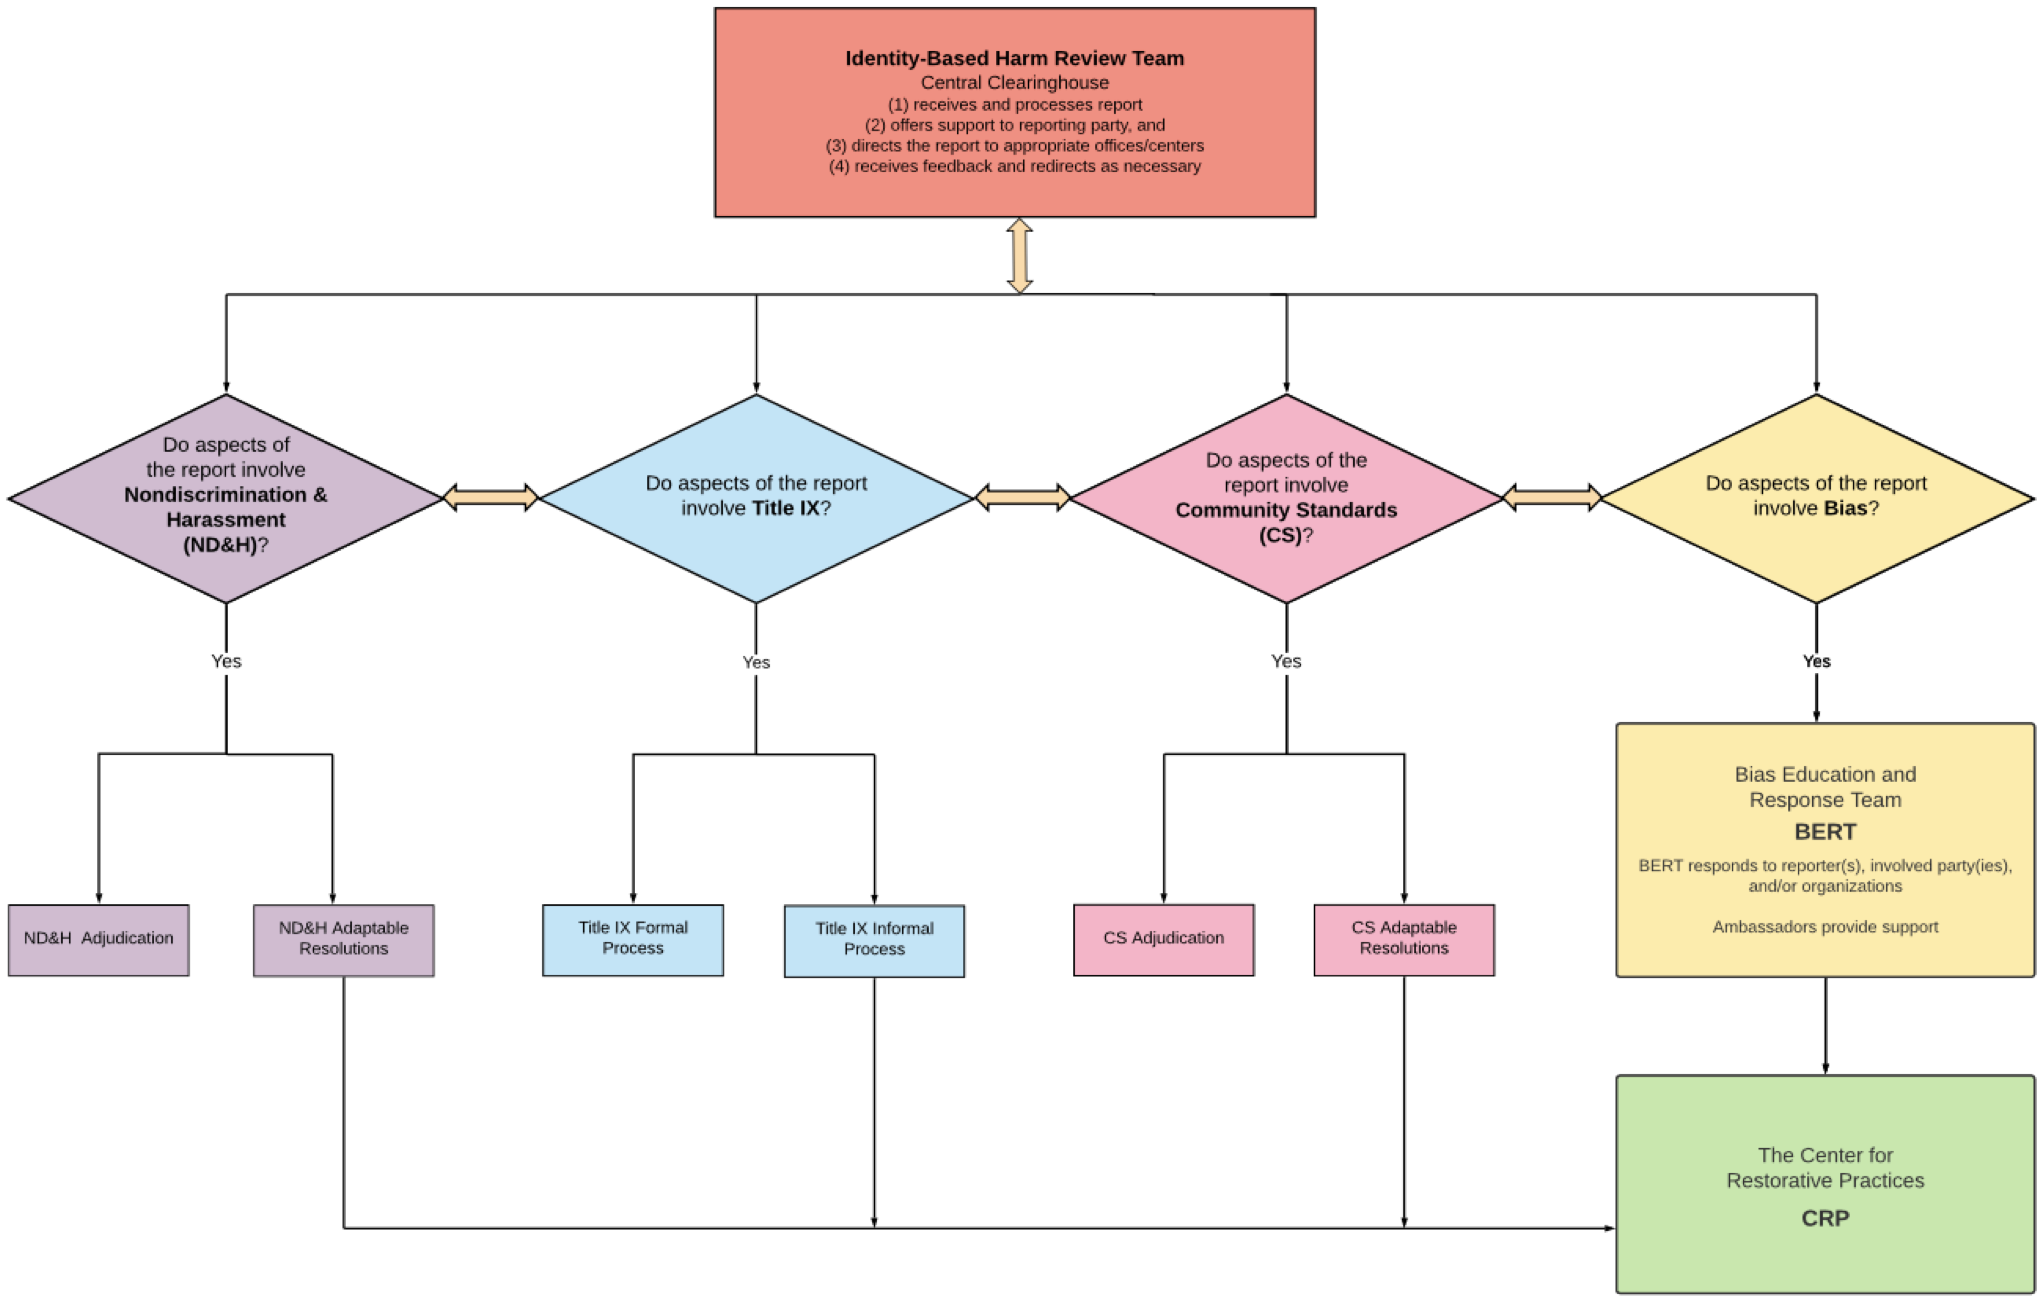 flowchart - complete text is provided below the image